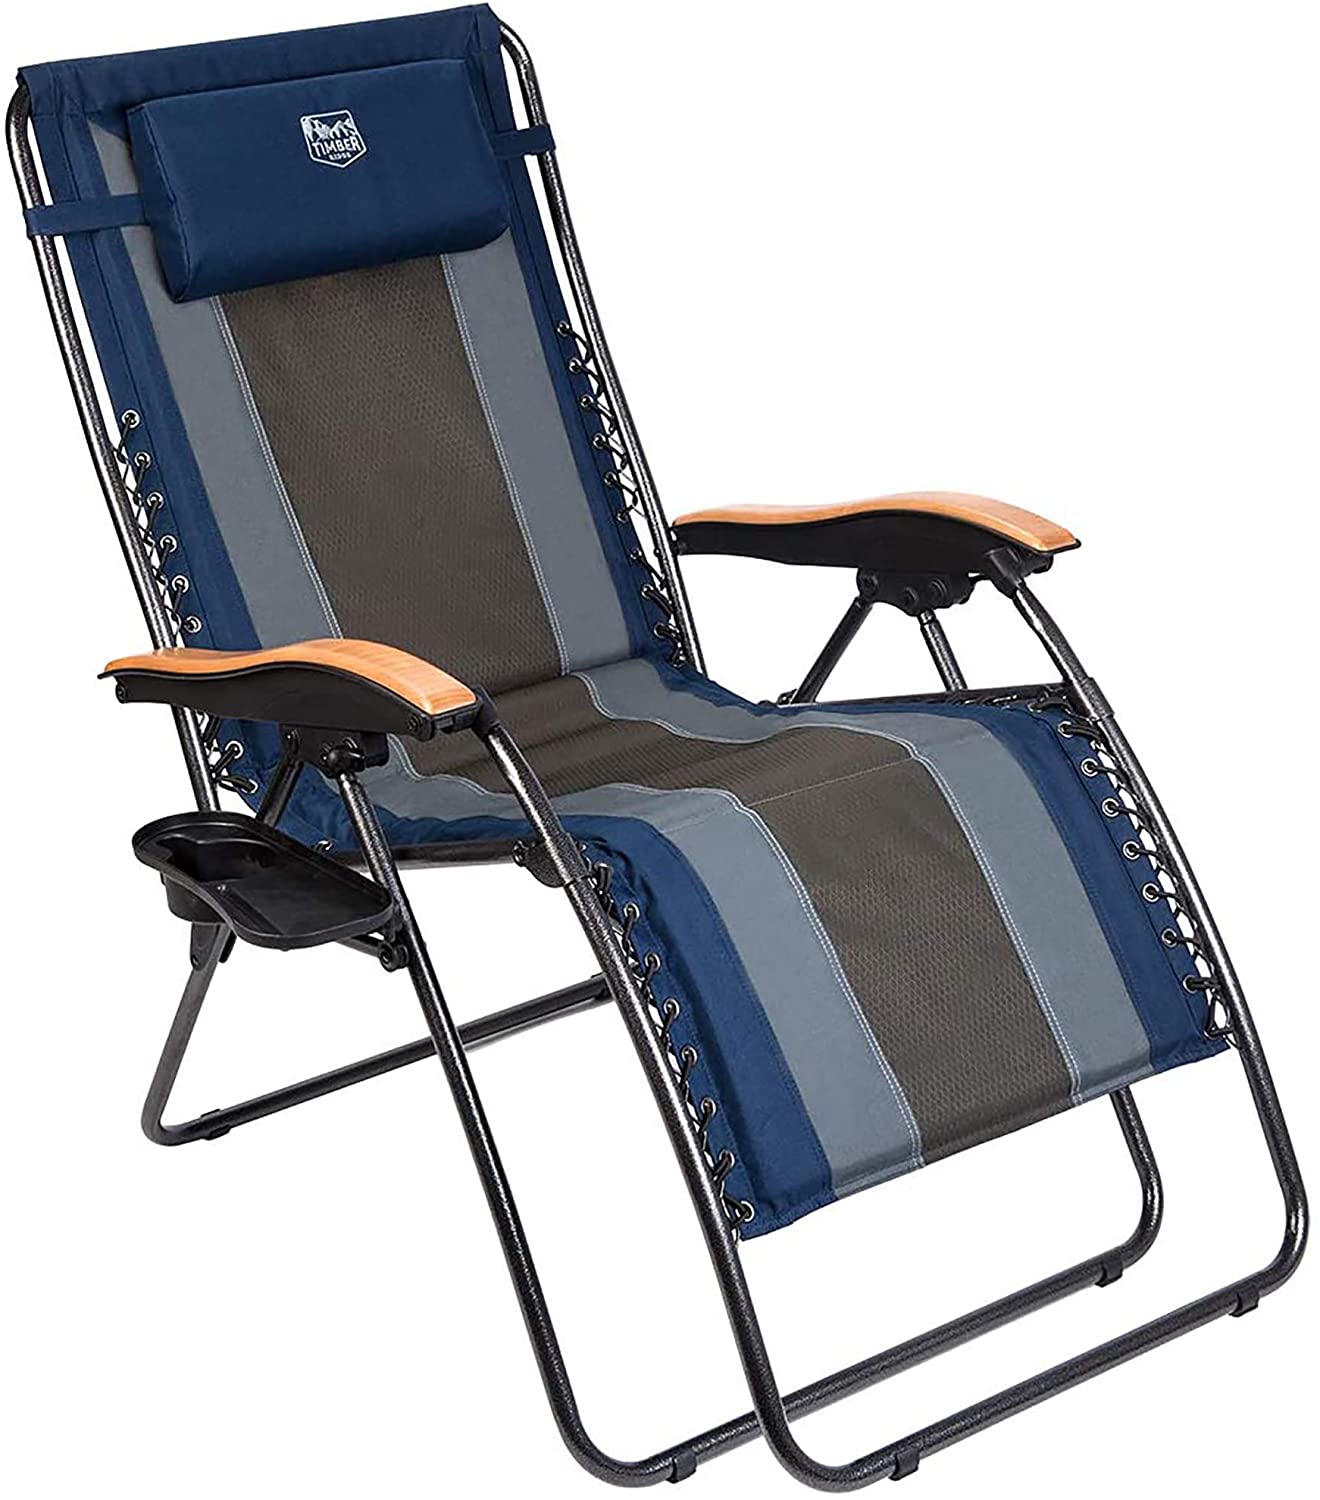 10 Best Folding Chairs For Sports 2022 Buying Guide